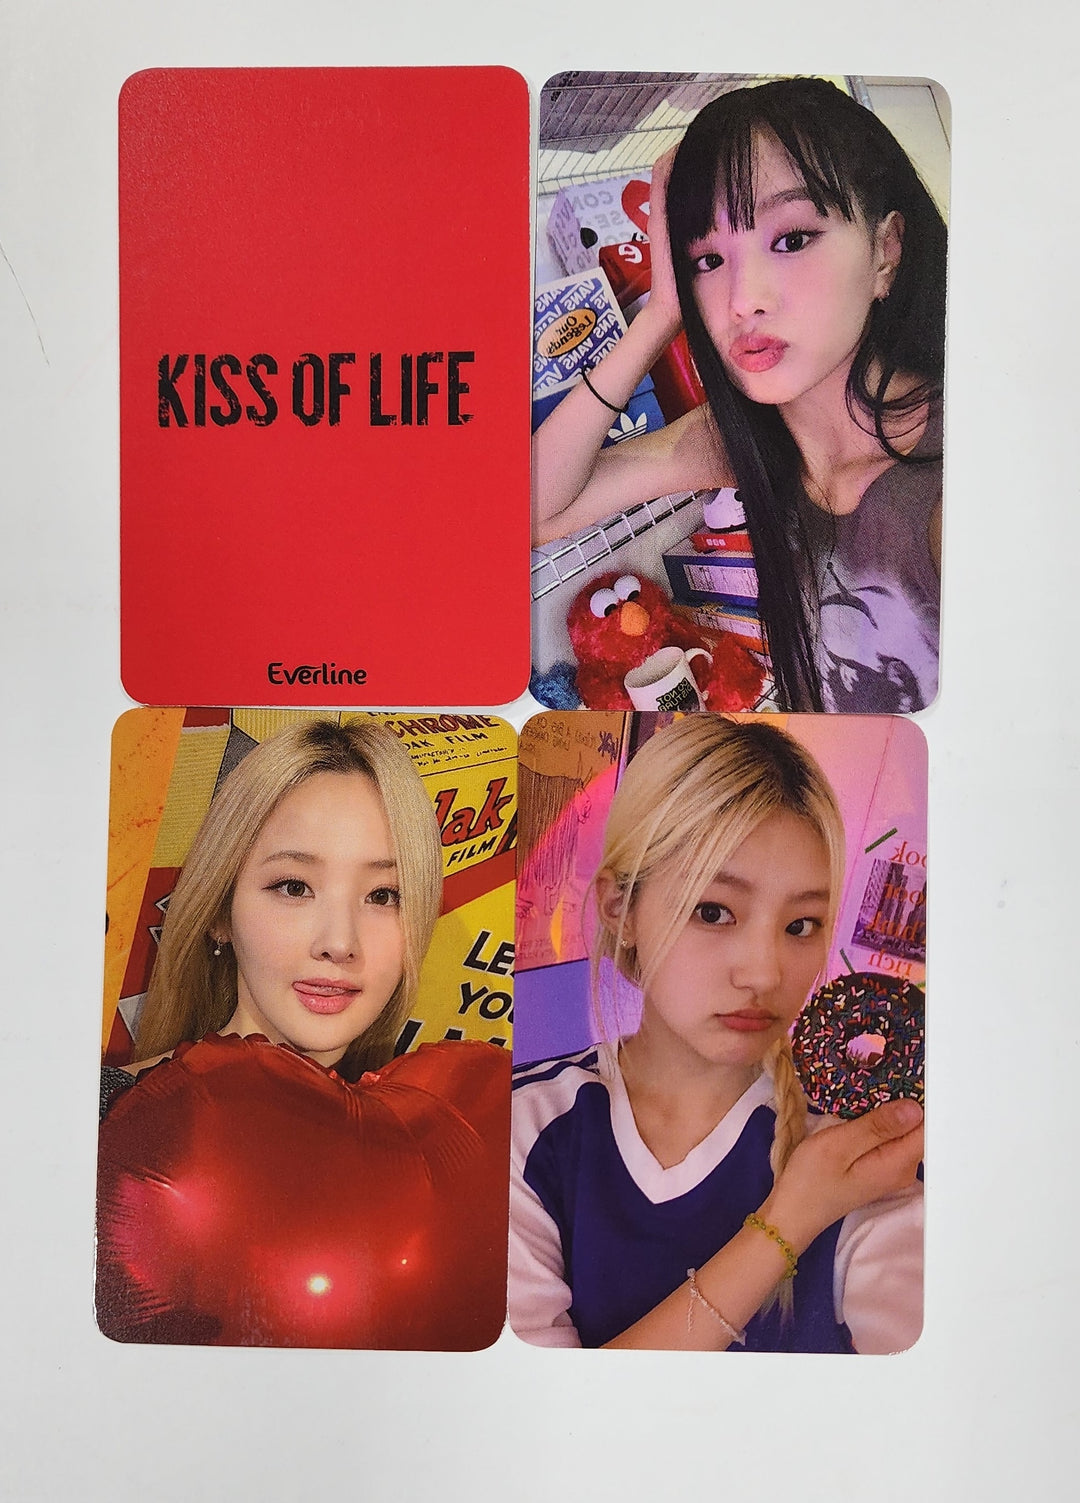 KISS OF LIFE "KISS OF LIFE" - Everline Fansign Event Photocard Round 2 [23.08.29]